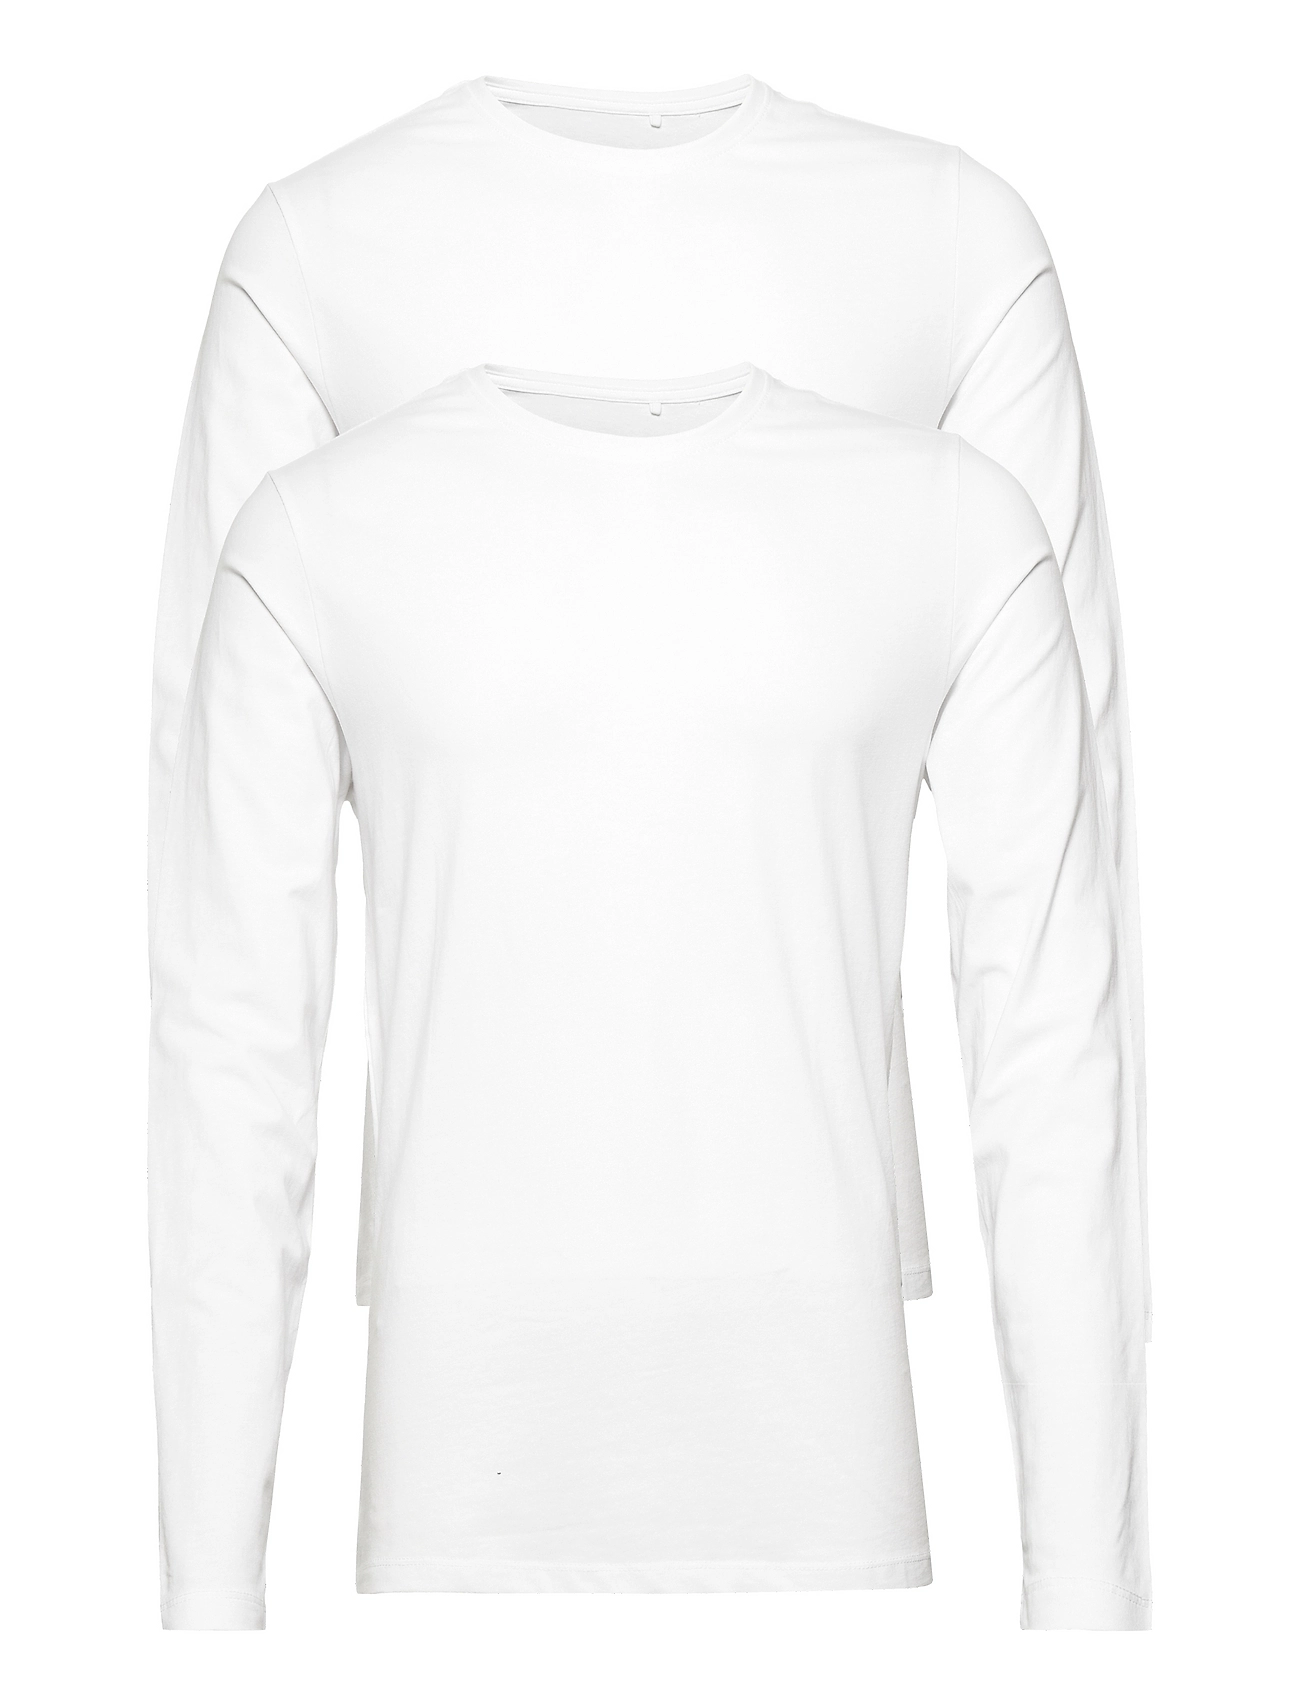 t-shirts - Ls Long-sleeved Neck 2-pack Bhdinton Blend Crew